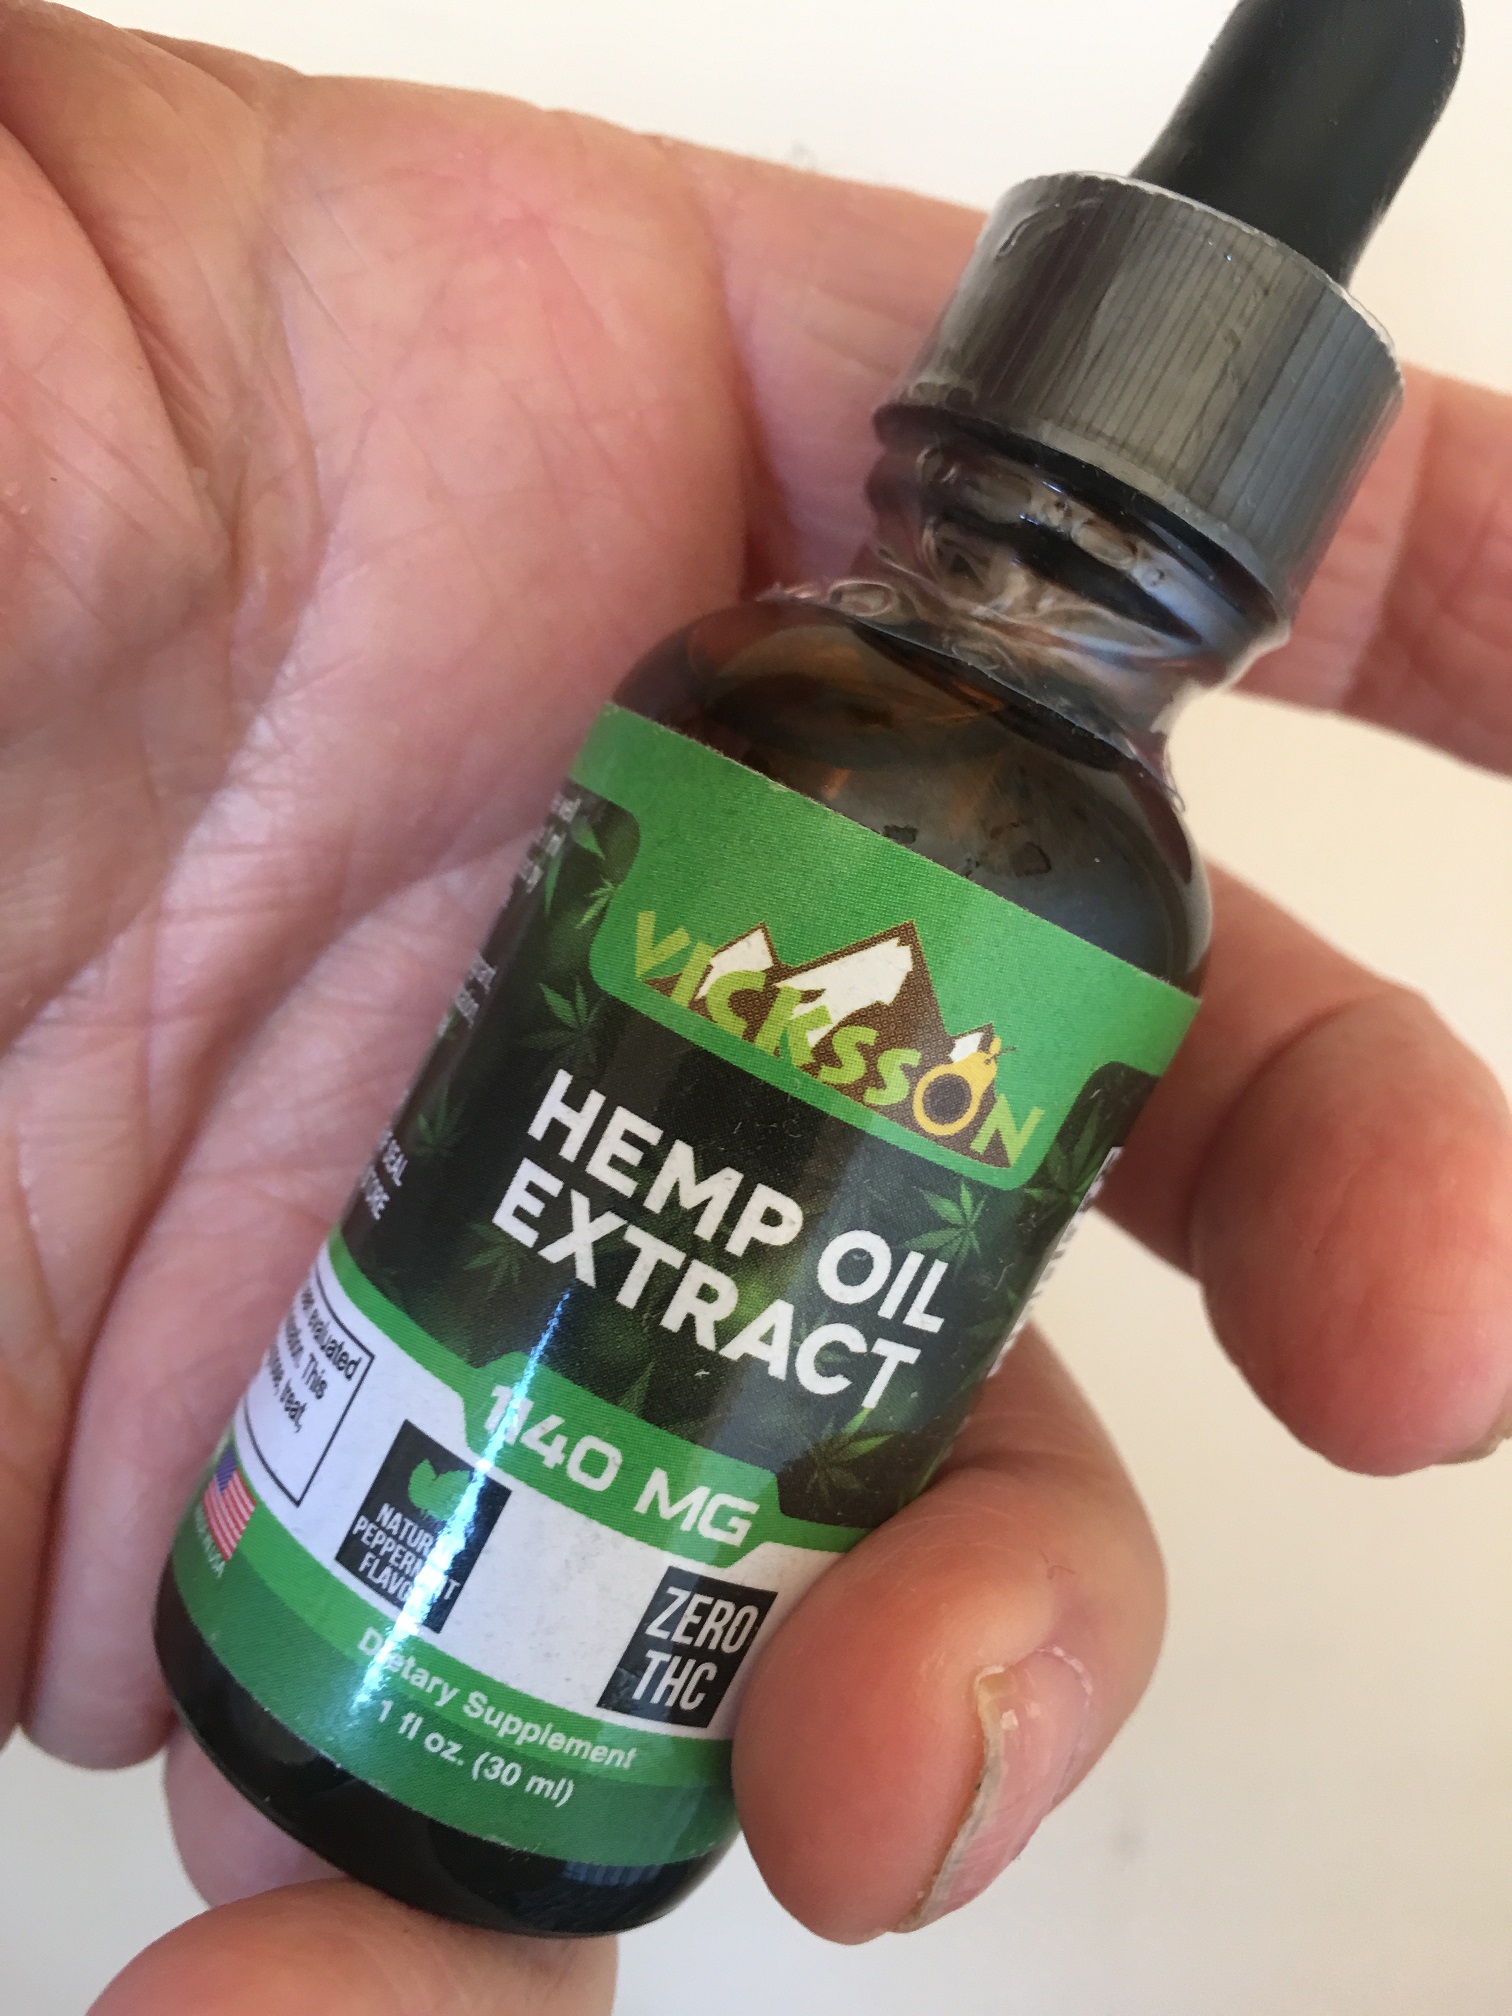 Hemp extract is great, both externally and internally as well